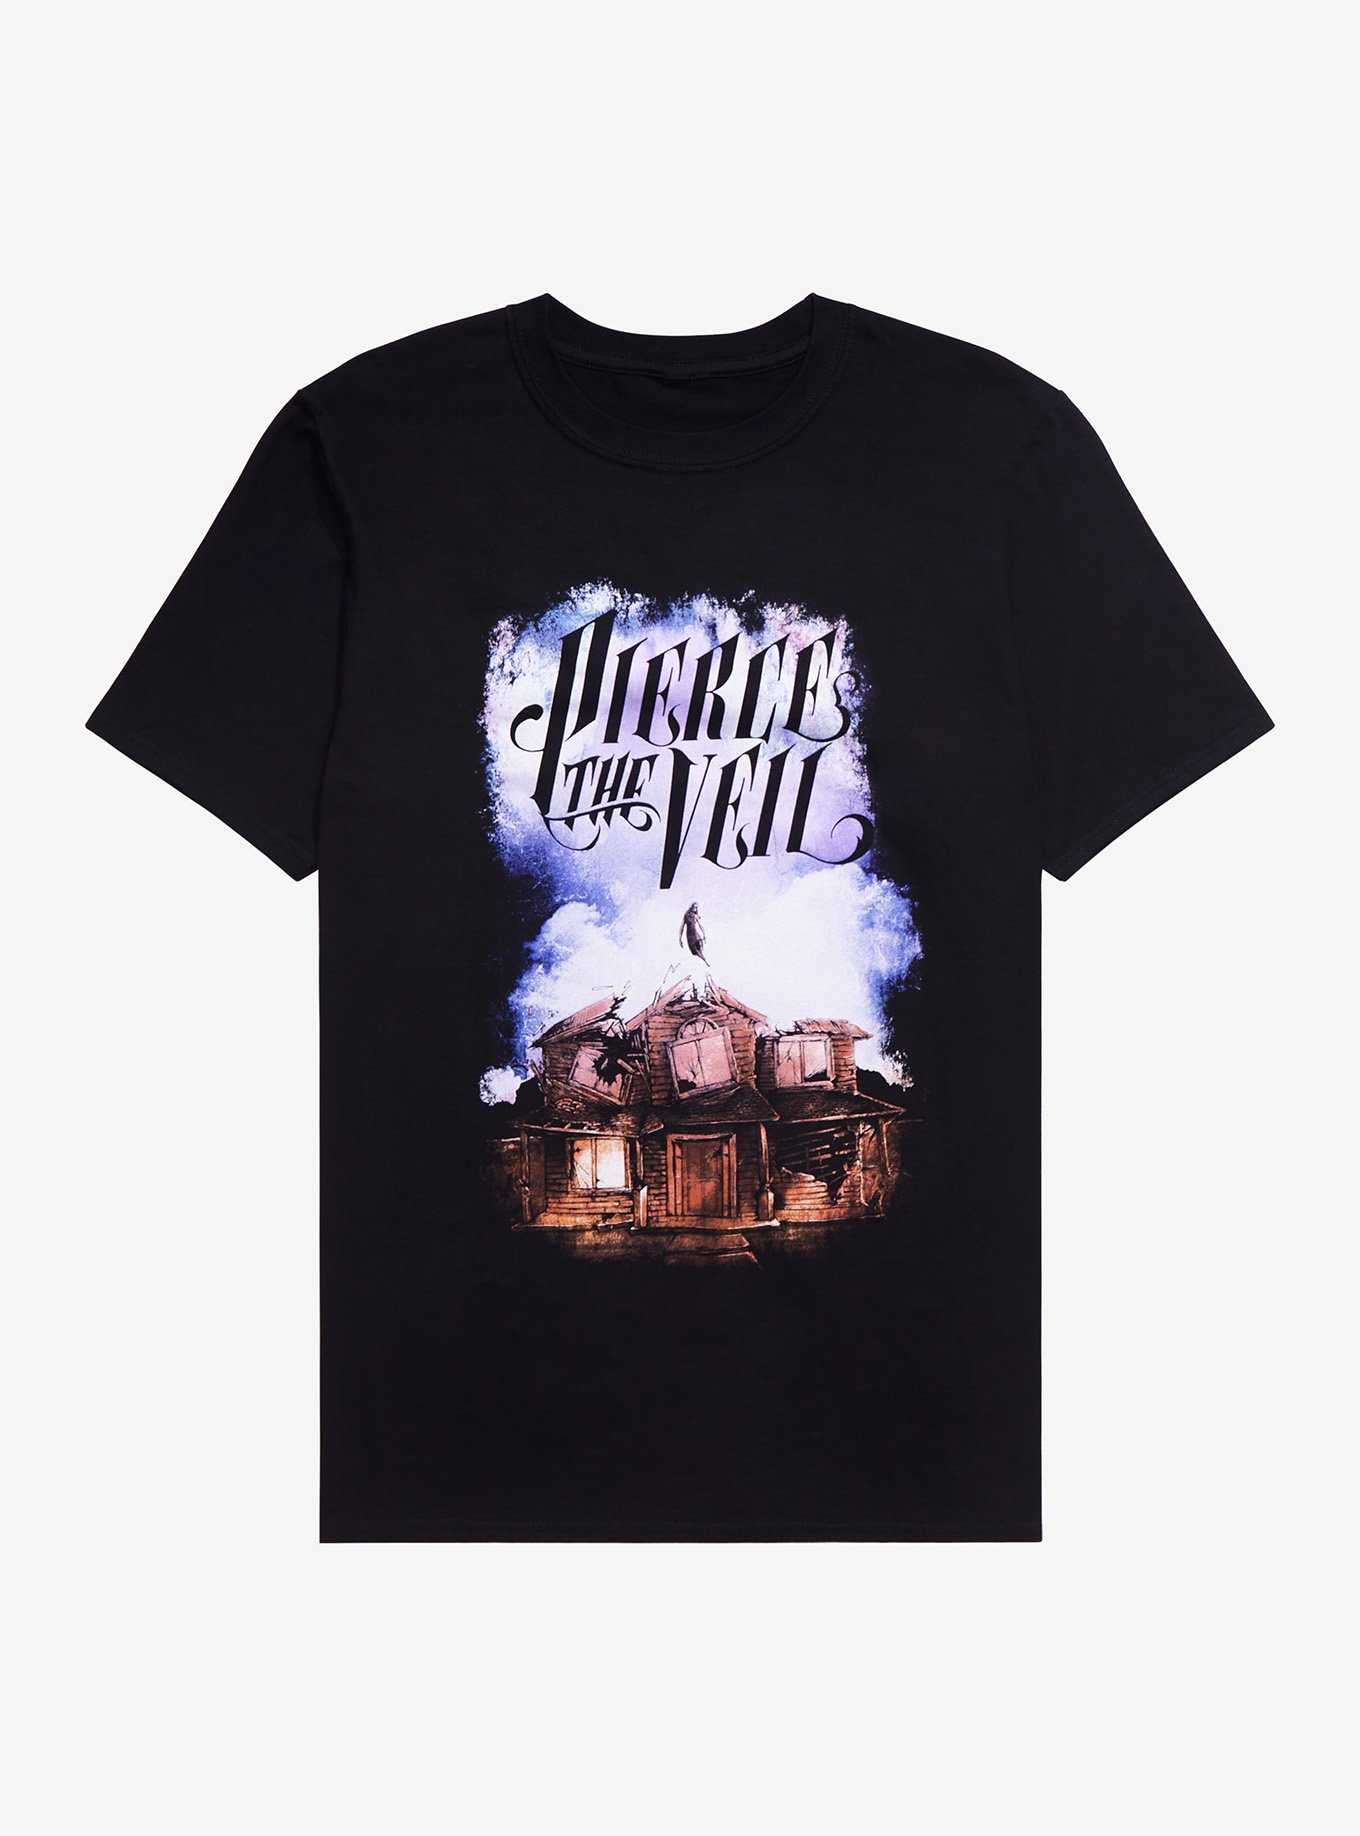 Pierce The Veil Collide With The Sky T-Shirt, , hi-res